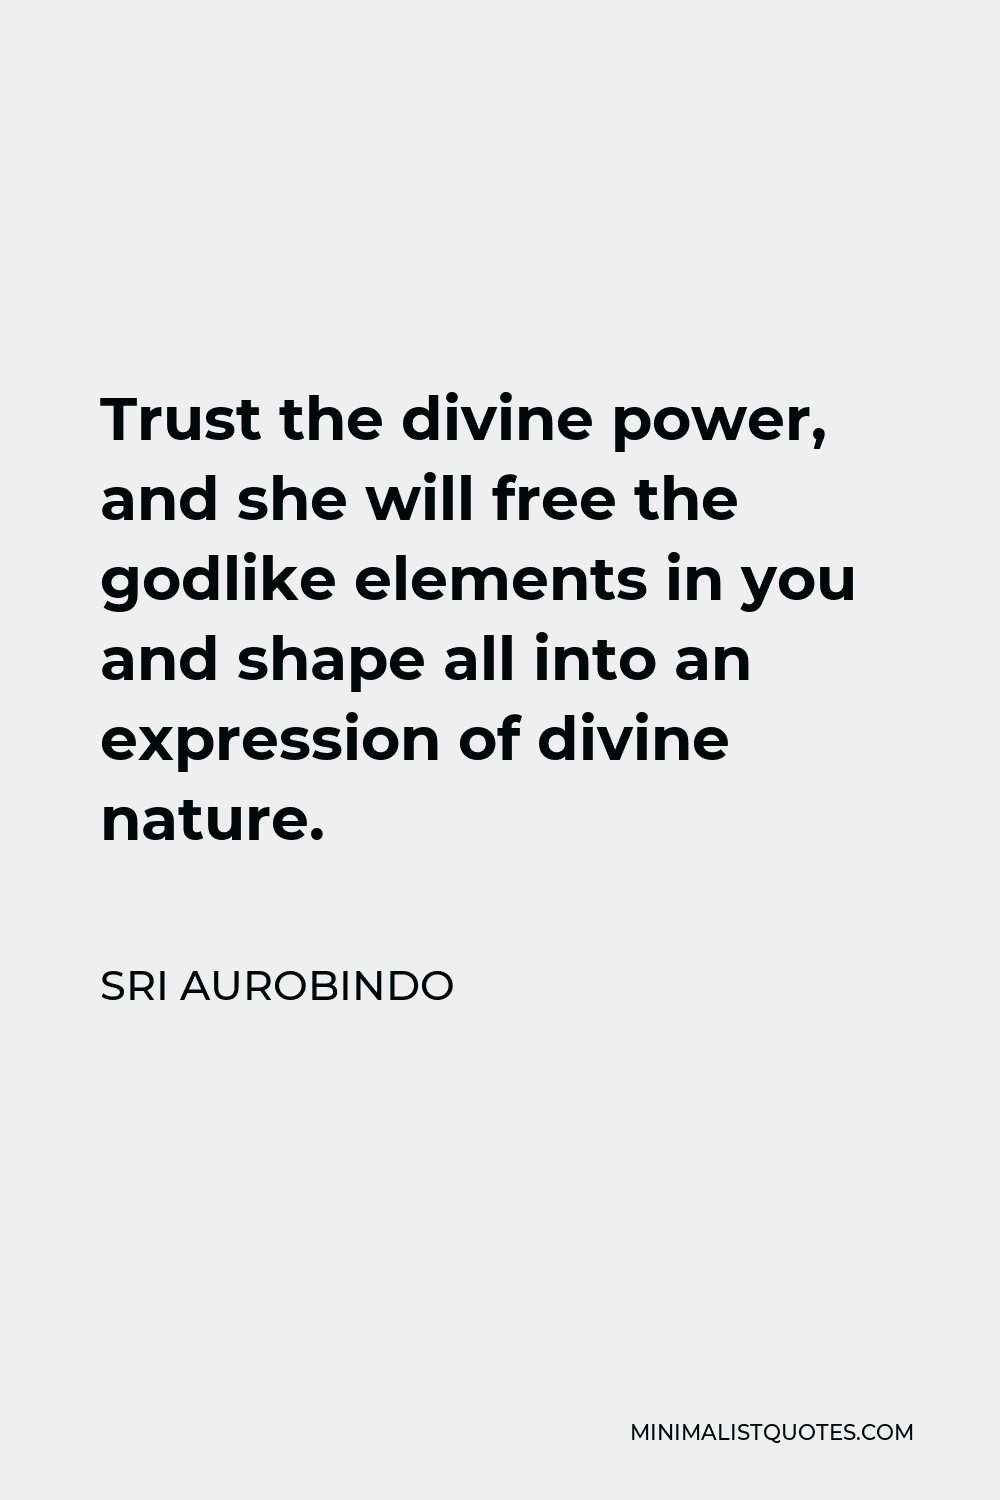 Sri Aurobindo Quote - Trust the divine power, and she will free the godlike elements in you and shape all into an expression of divine nature.